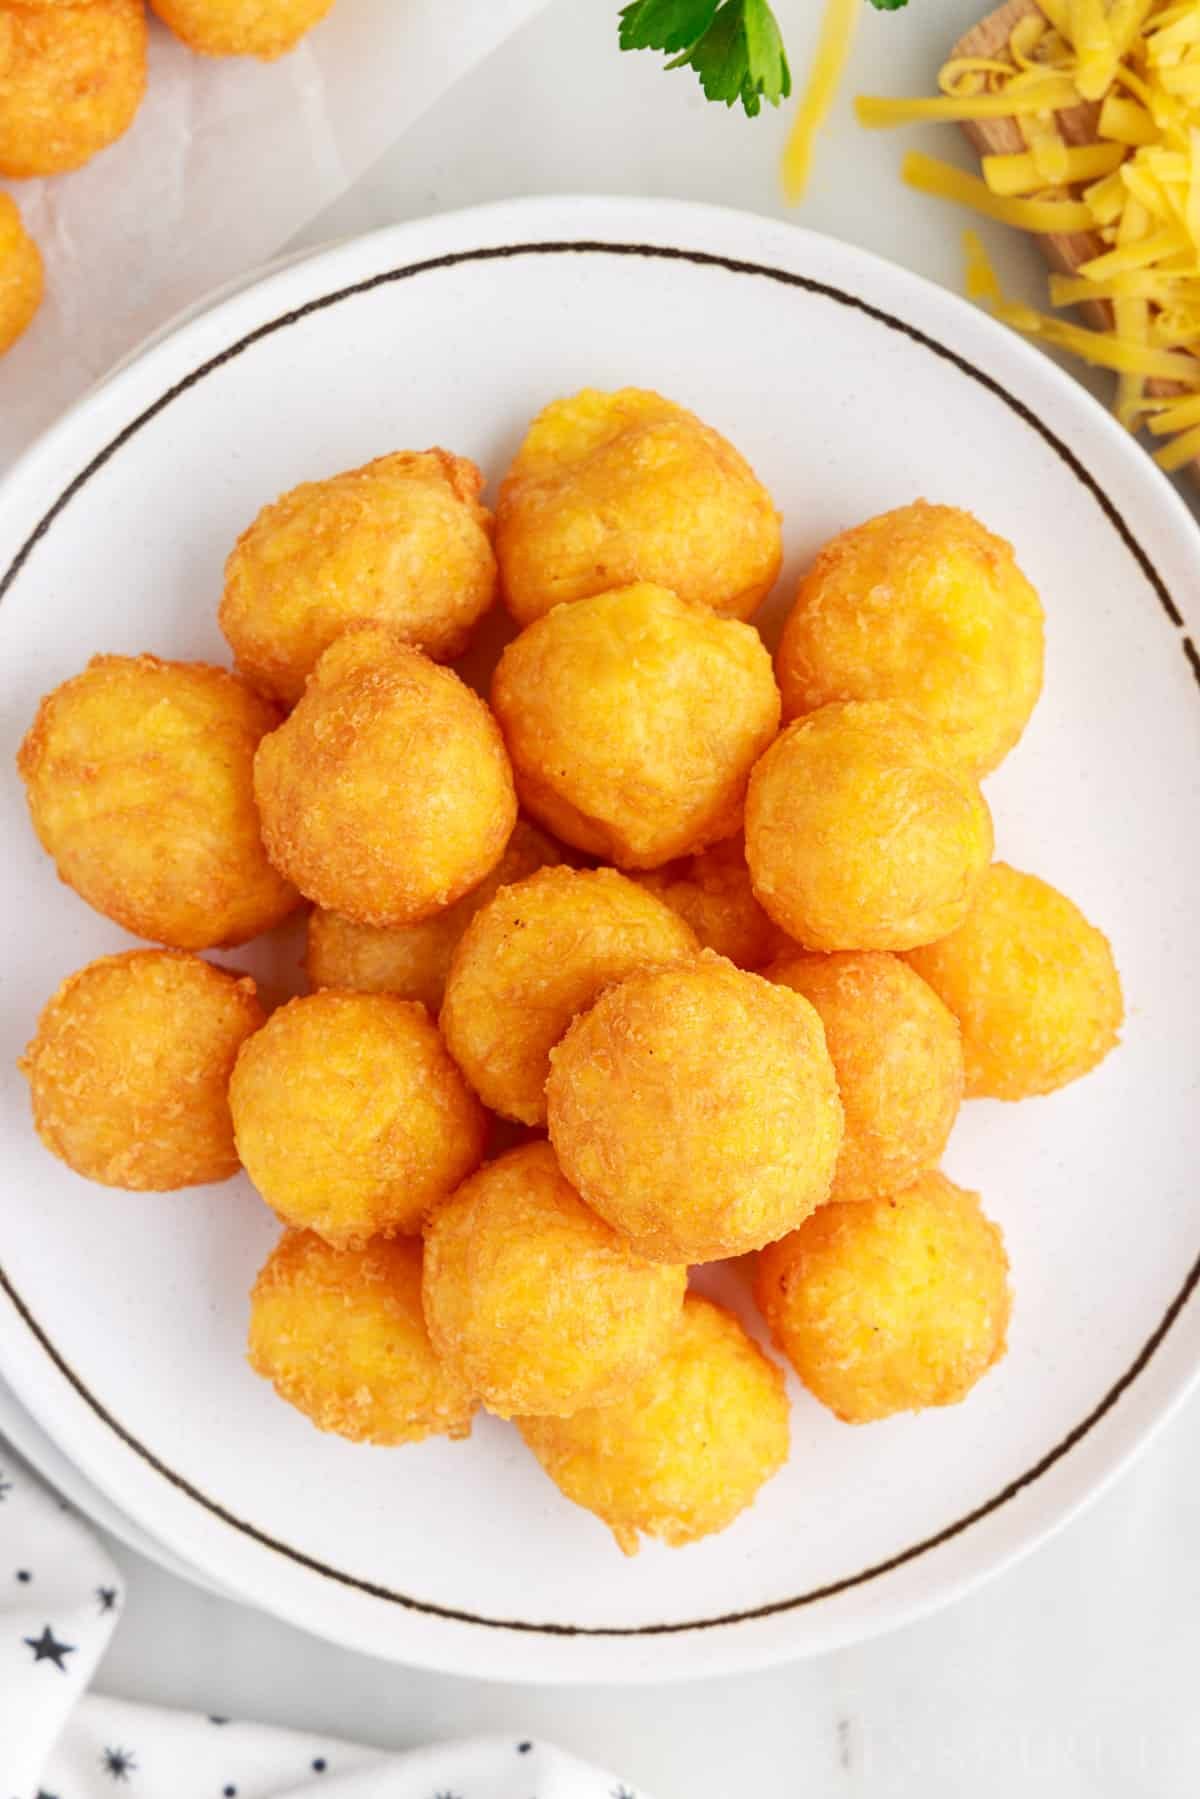 Overhead view of a plate of Fried Cheese Balls.